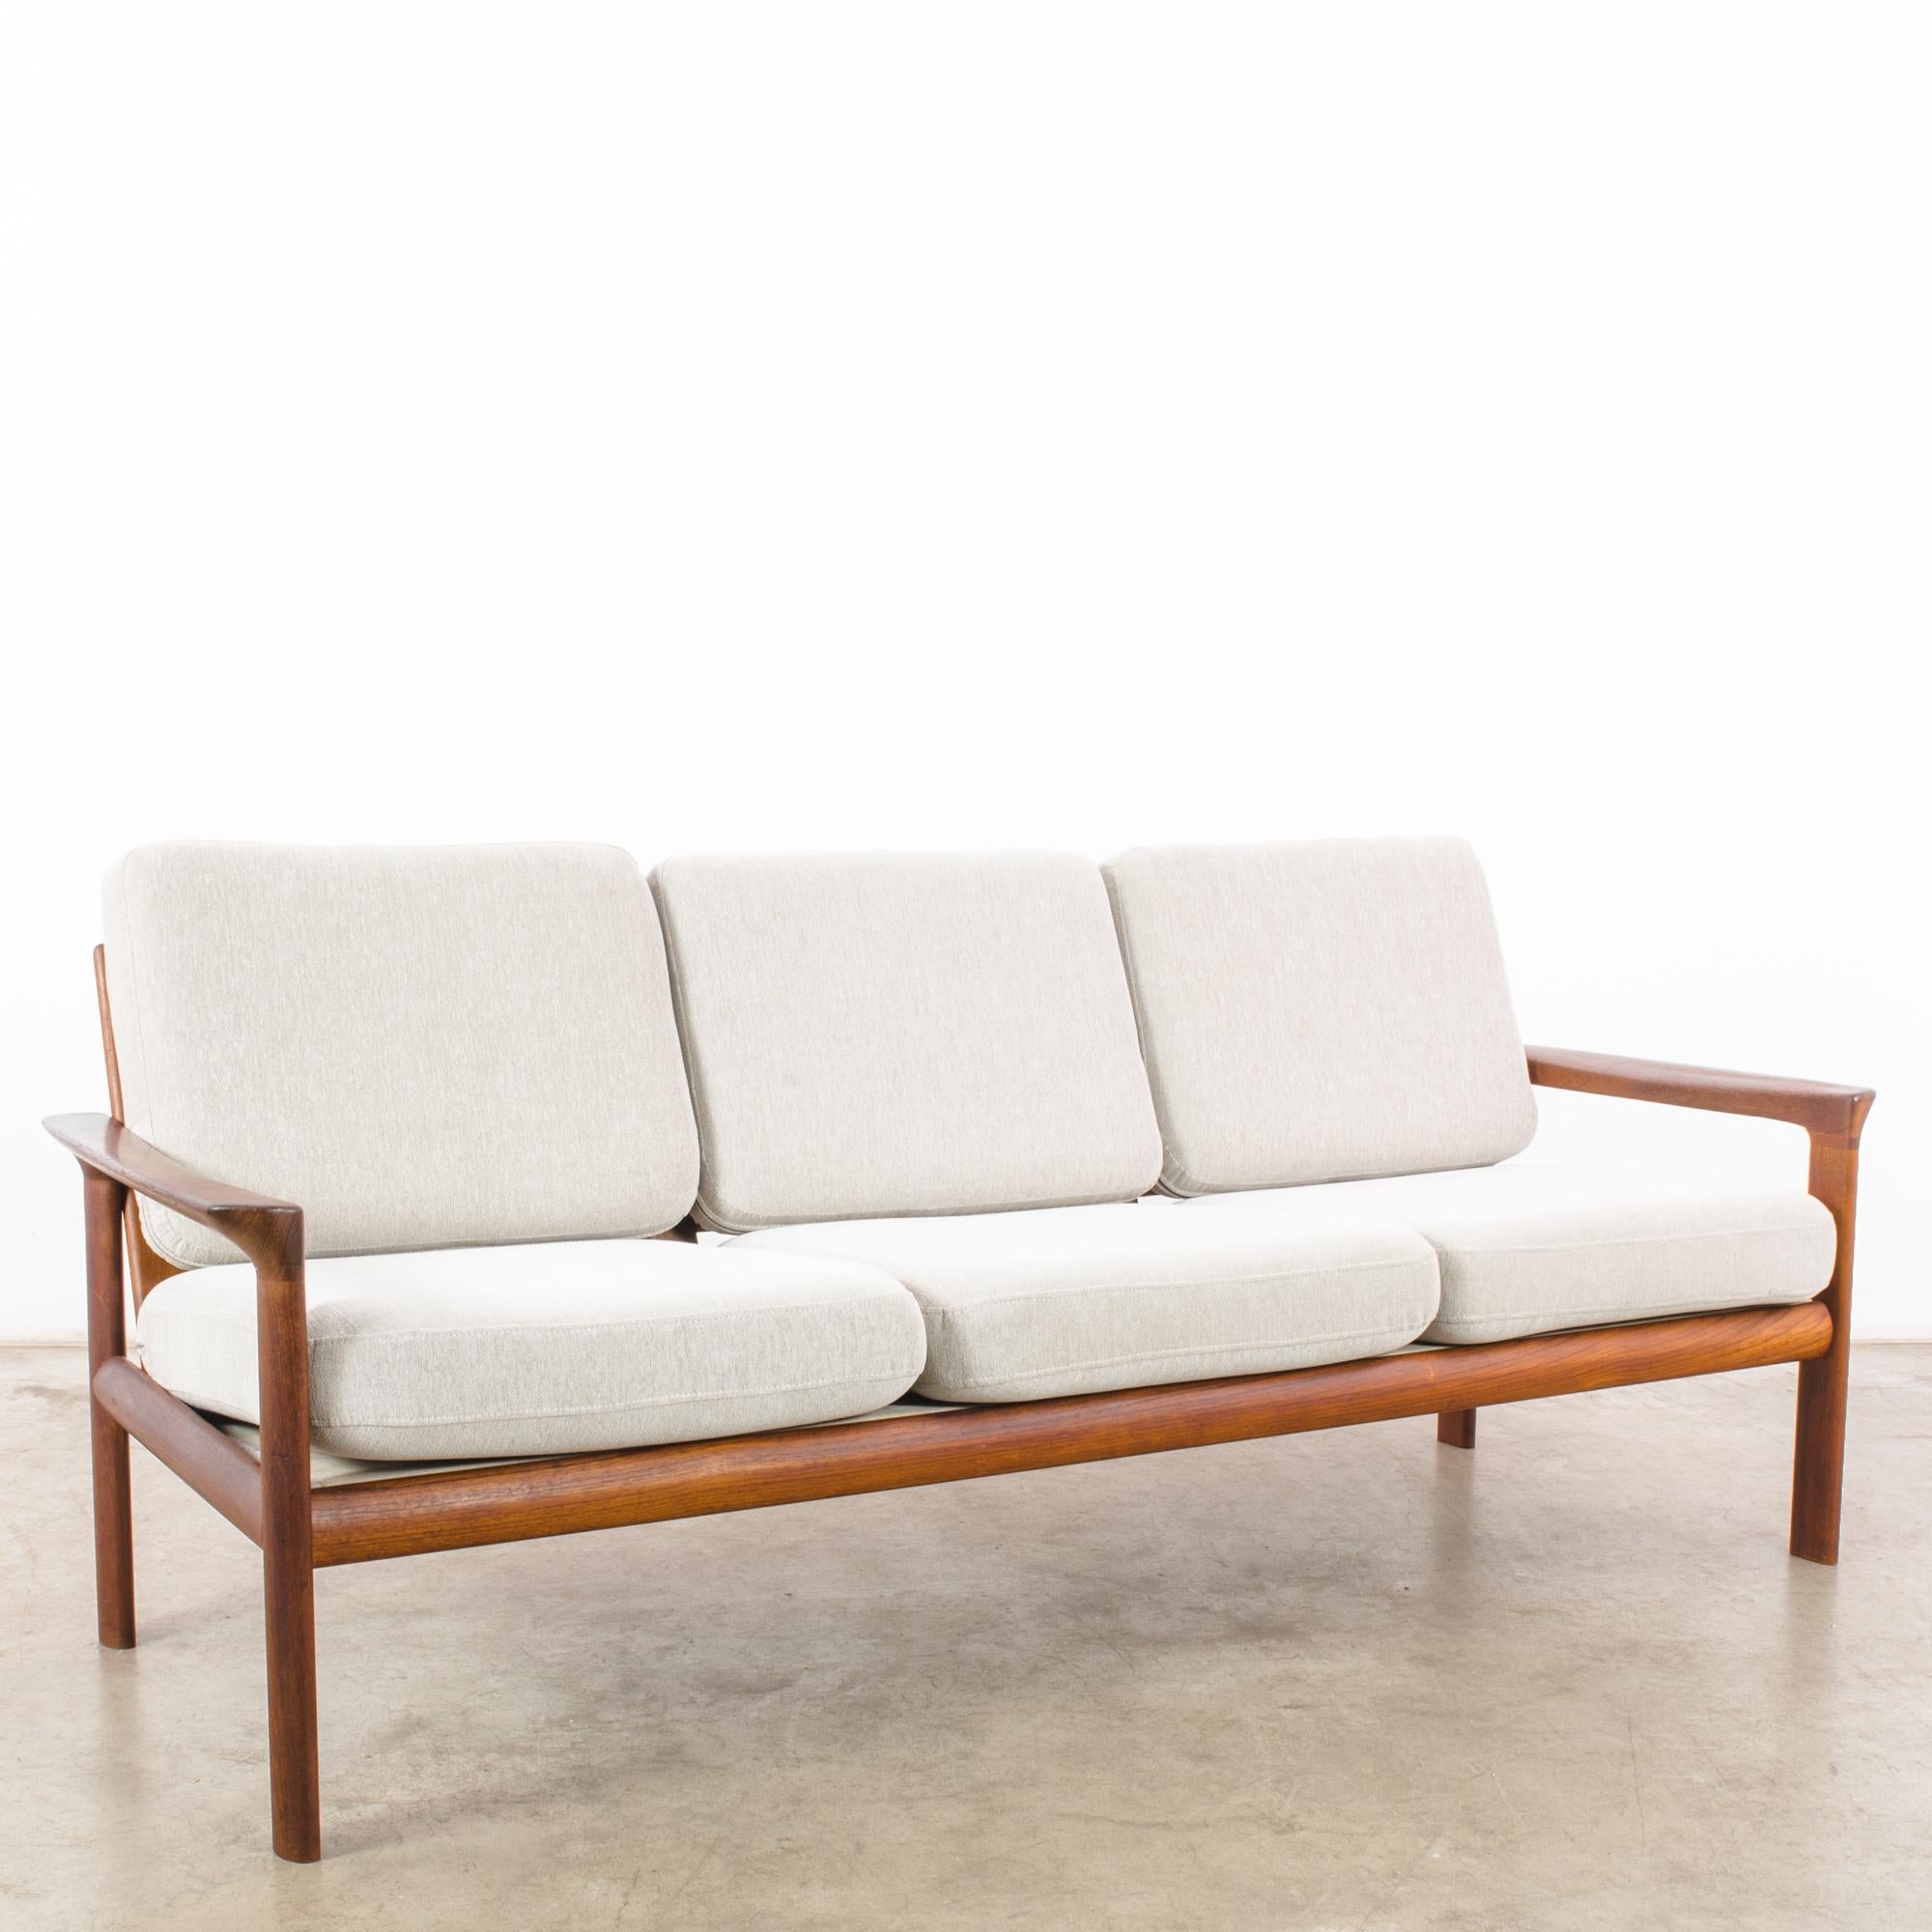 In the dynamic design landscape of 1960s Denmark, this teak sofa epitomizes the sleek sophistication and minimalist charm of the era. Crafted with meticulous attention to detail, this piece represents the epitome of Danish craftsmanship and style